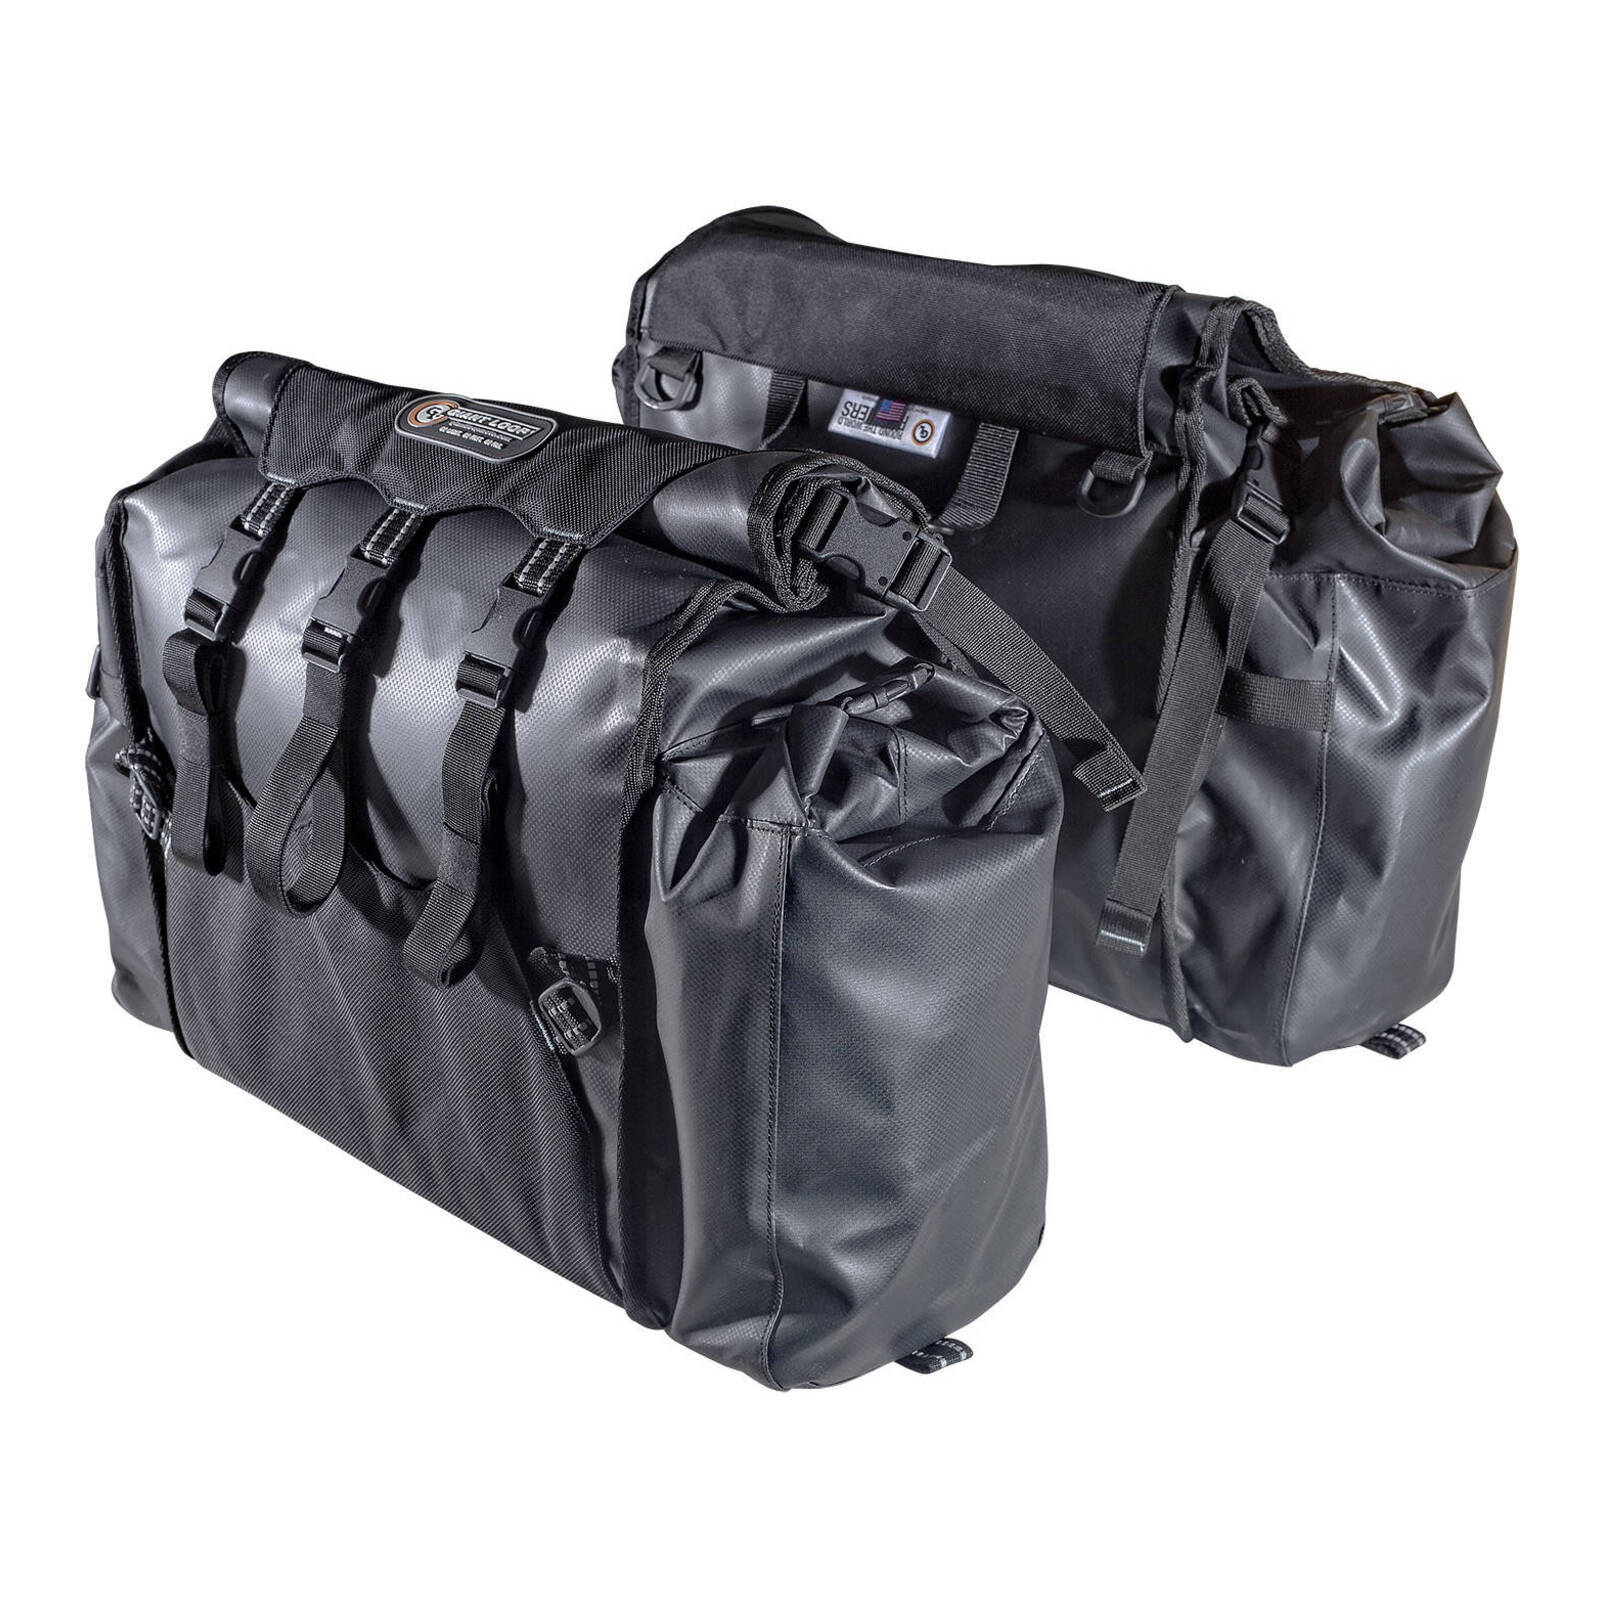 Giant Loop Round The World Panniers  - Black